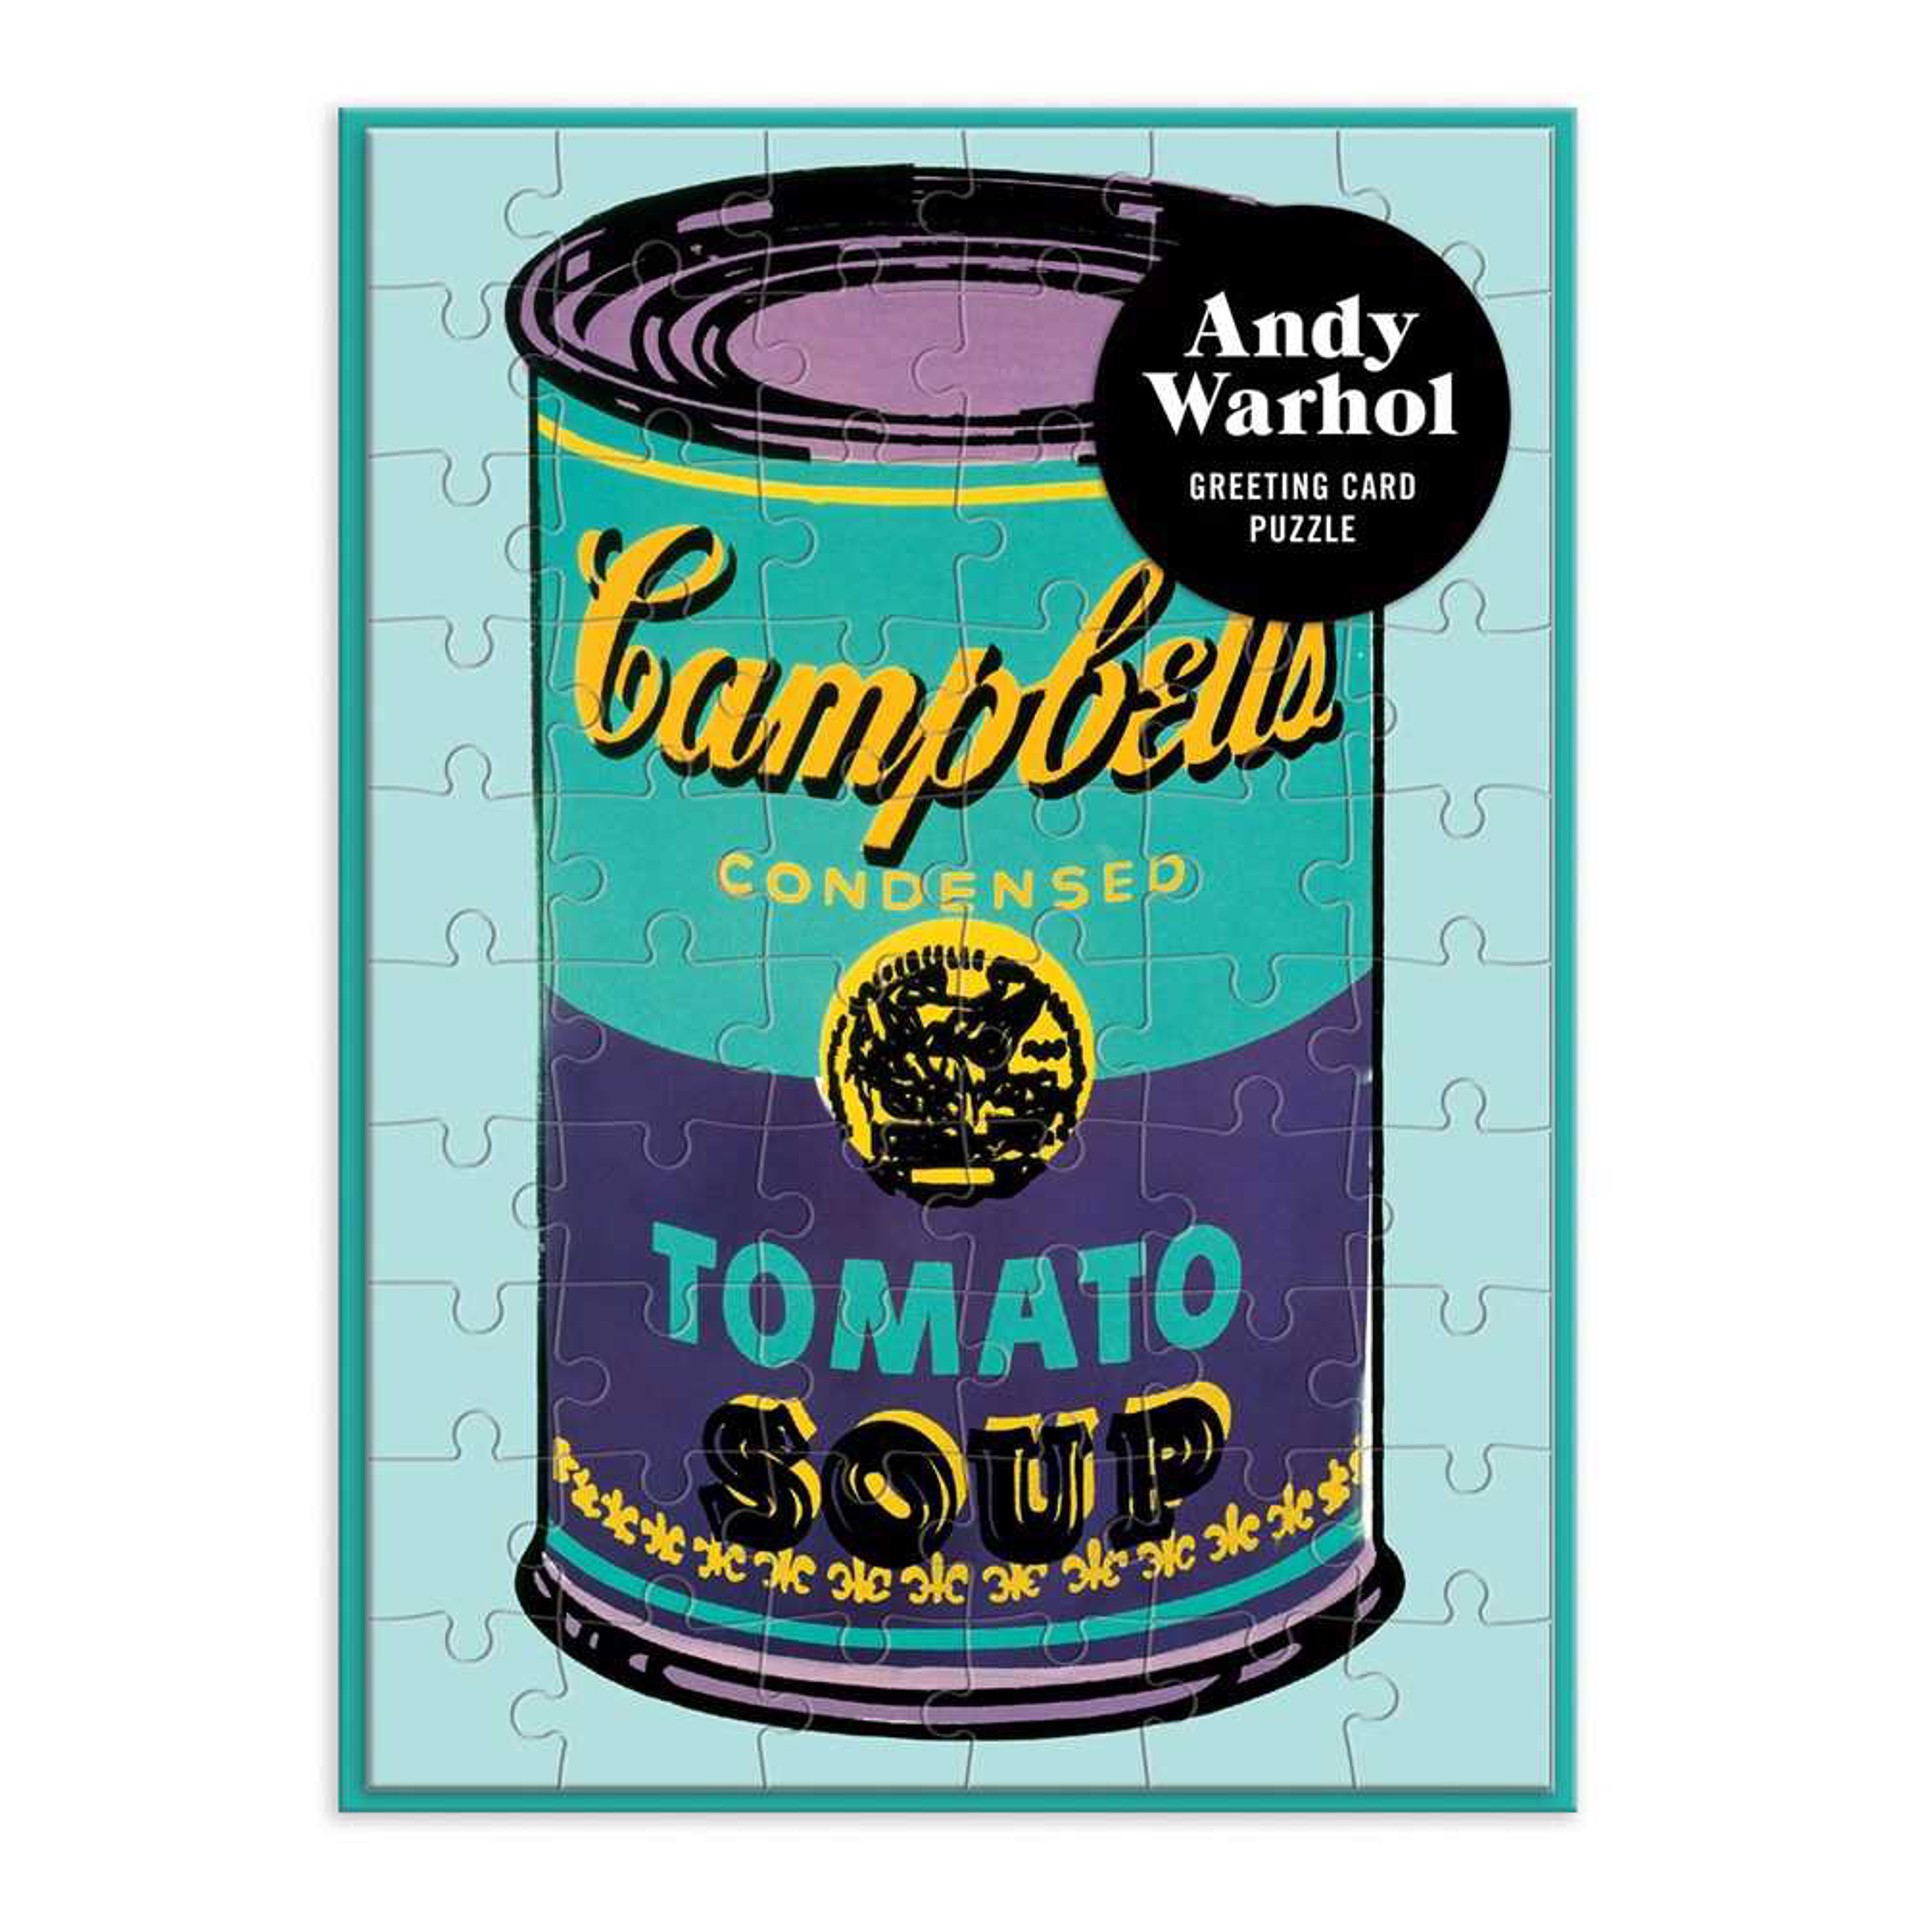 Andy Warhol Soup Can Greeting Card Puzzle by Andy Warhol